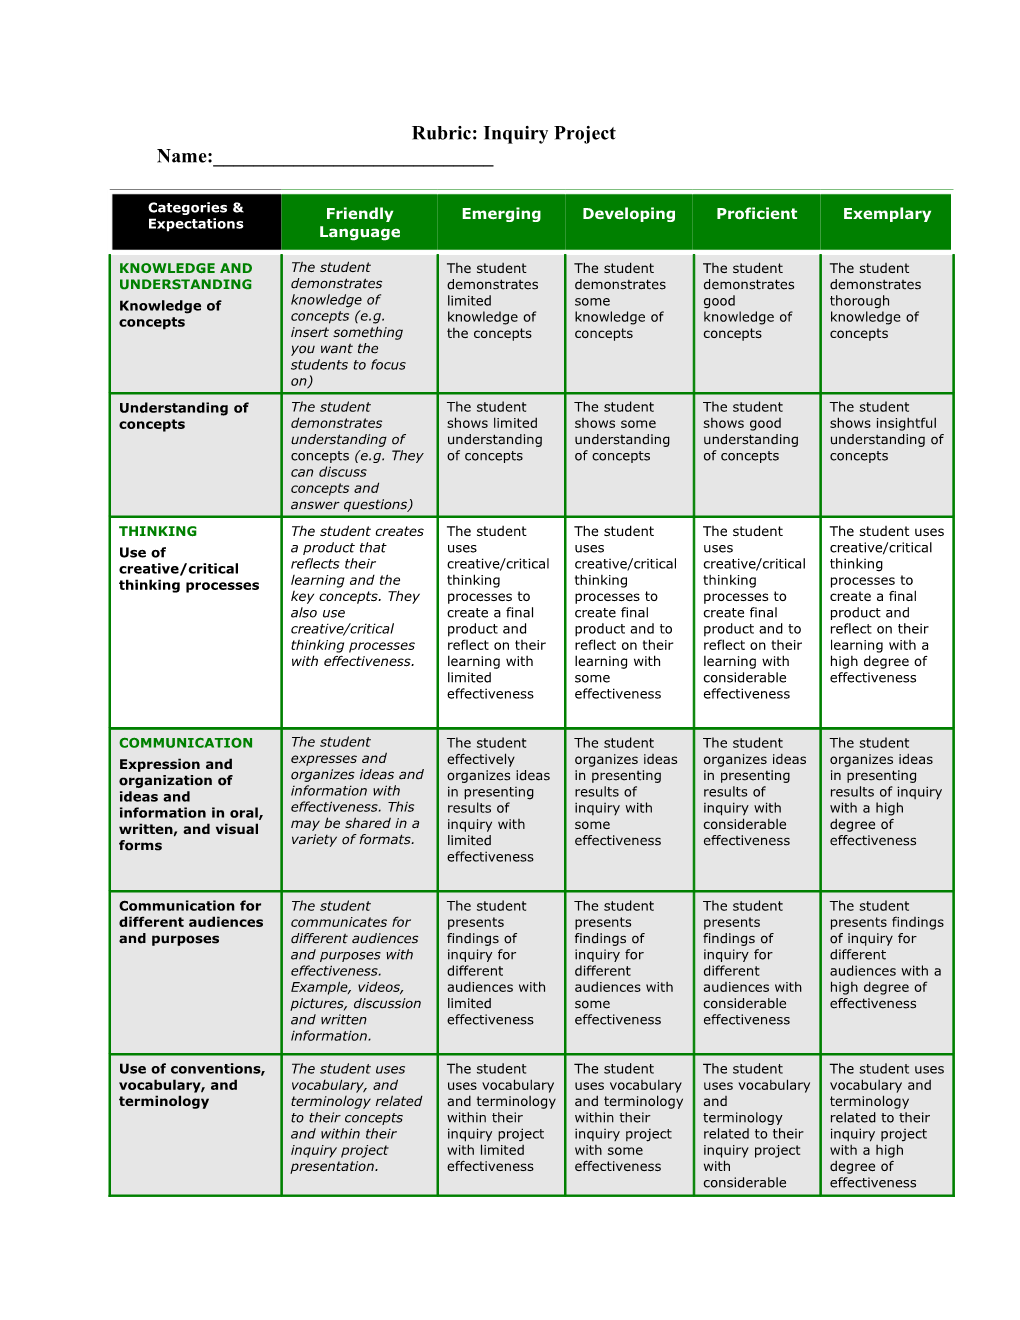 Generic Rubric to Assess a Research-Based Project (Inquiry)